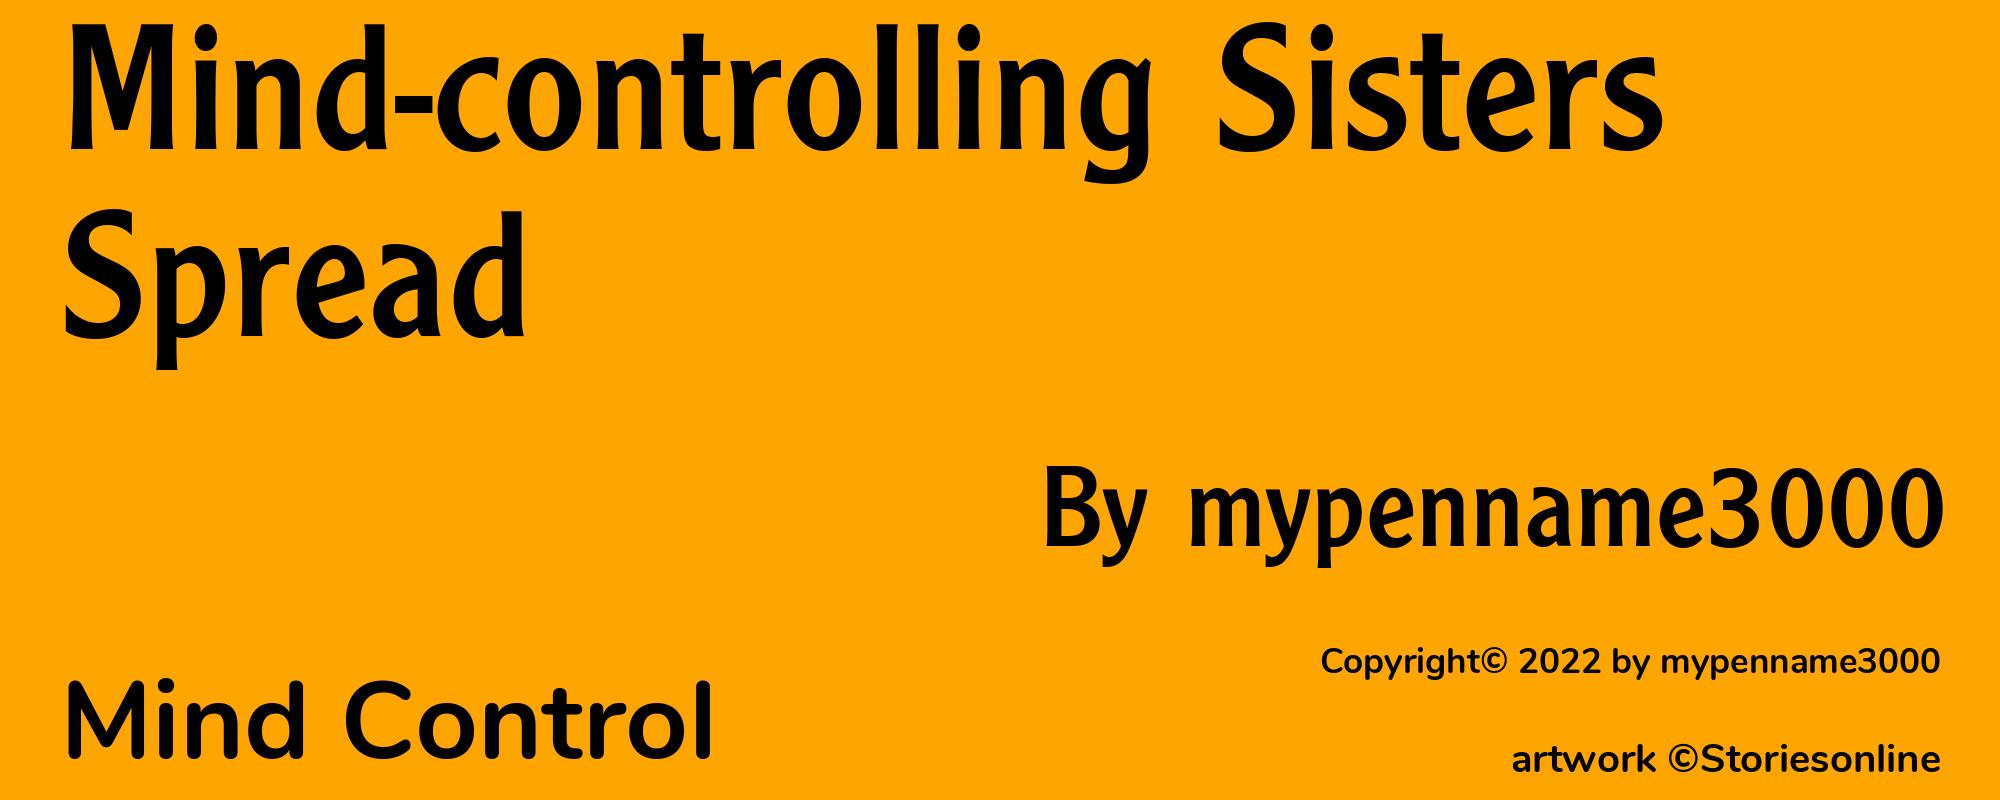 Mind-controlling Sisters Spread - Cover